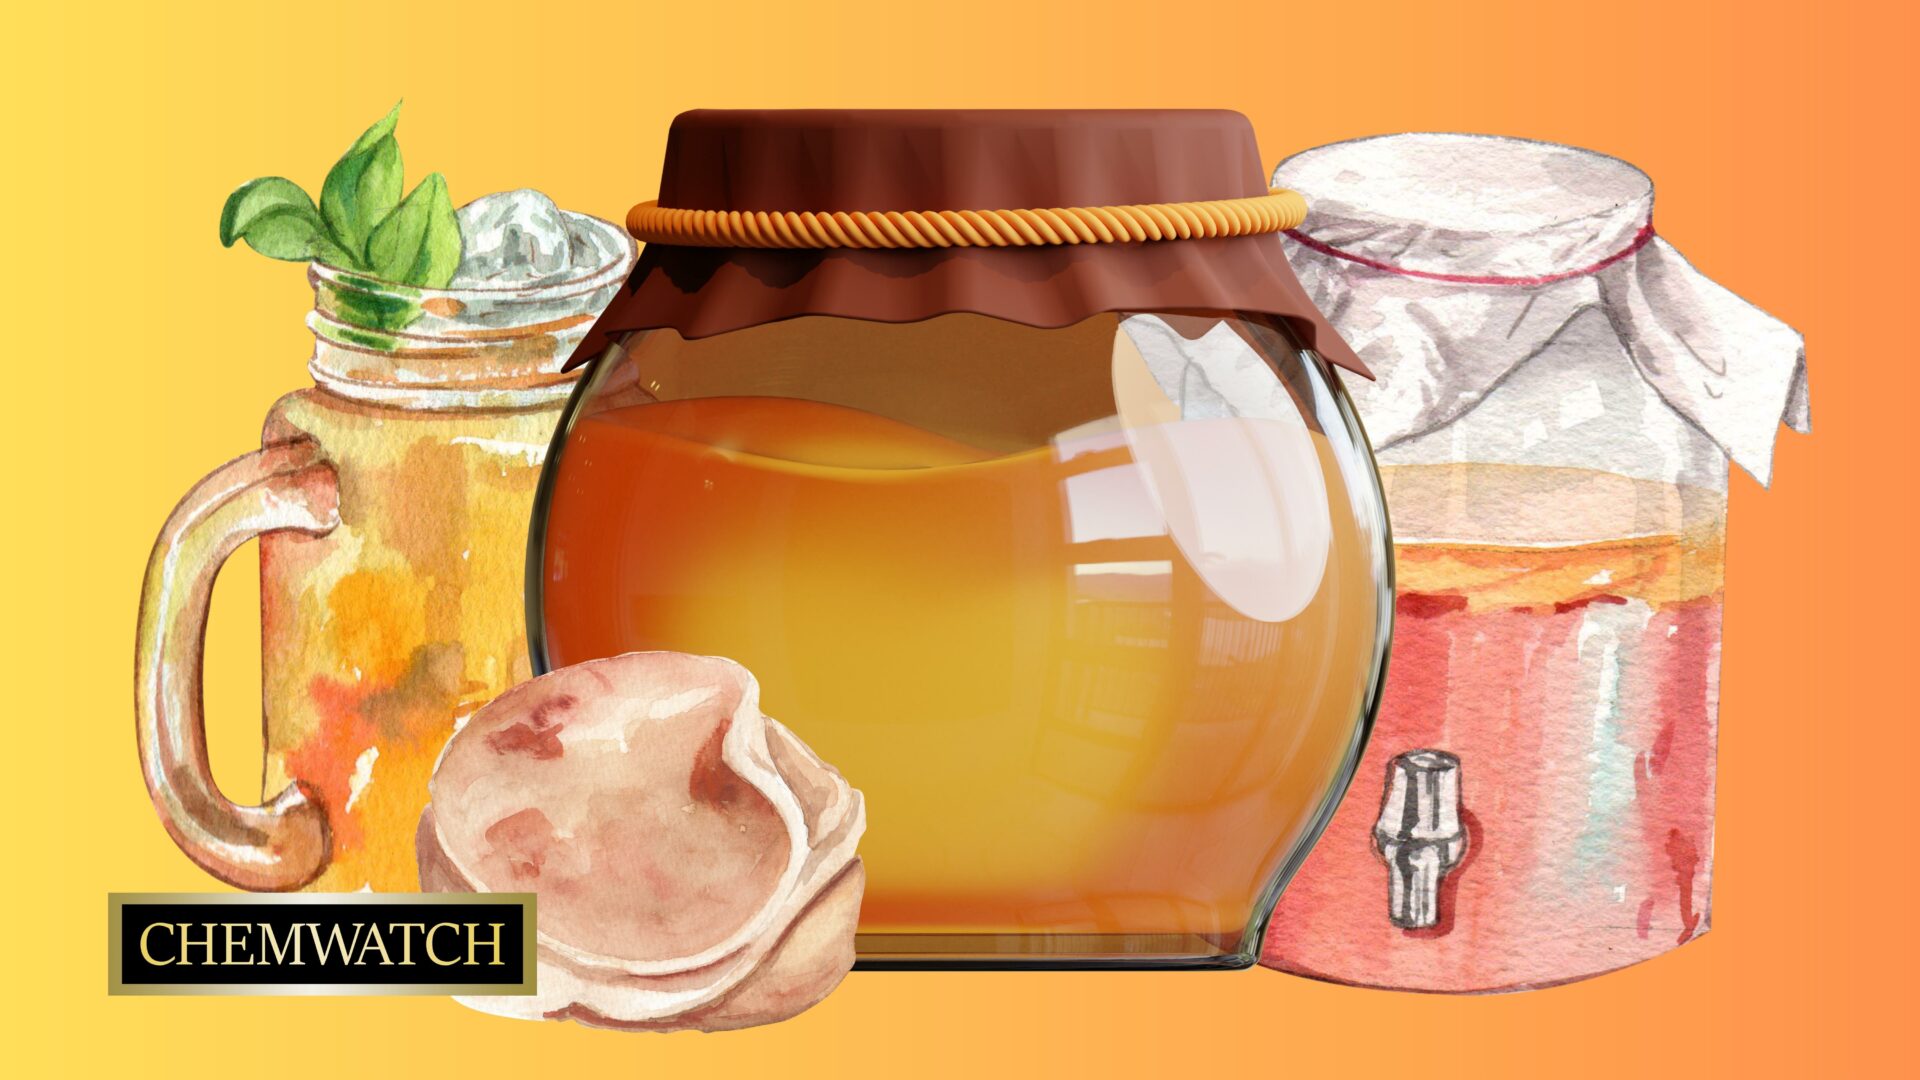 Kombucha is rich in probiotics, believed to aid in supporting gut health and digestion.